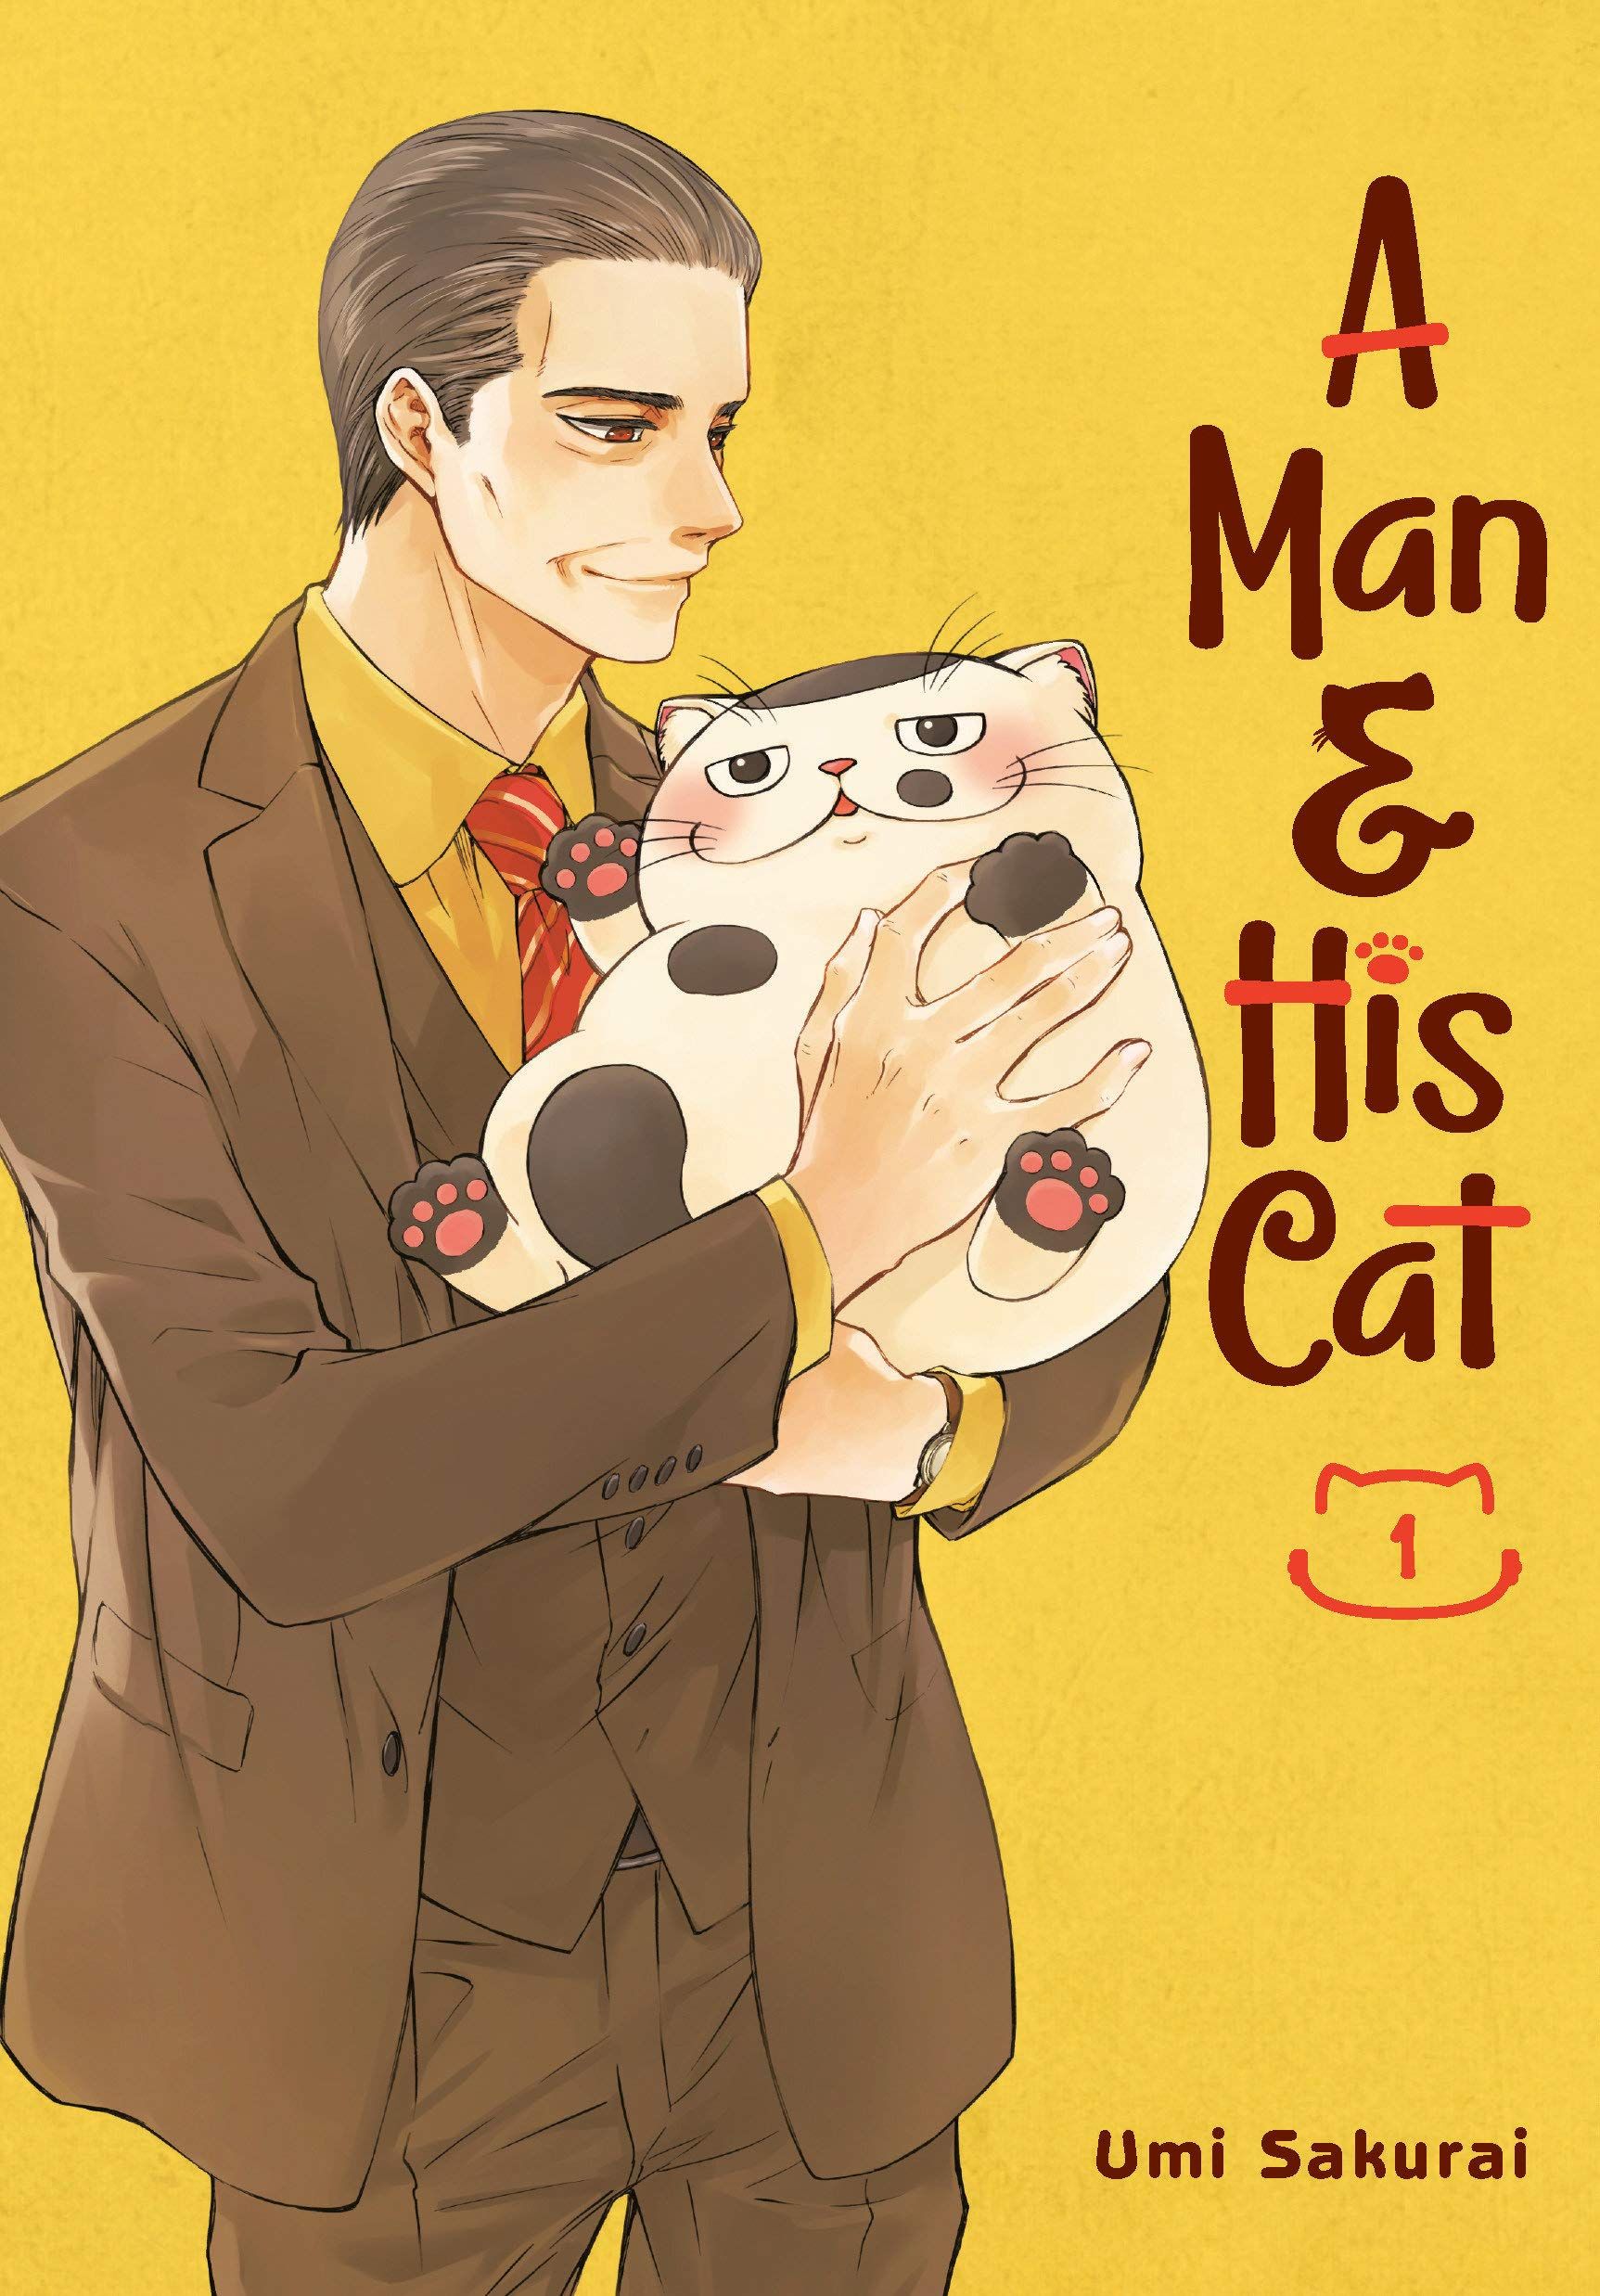 A Man and His Cat by Umi Sakurai cover